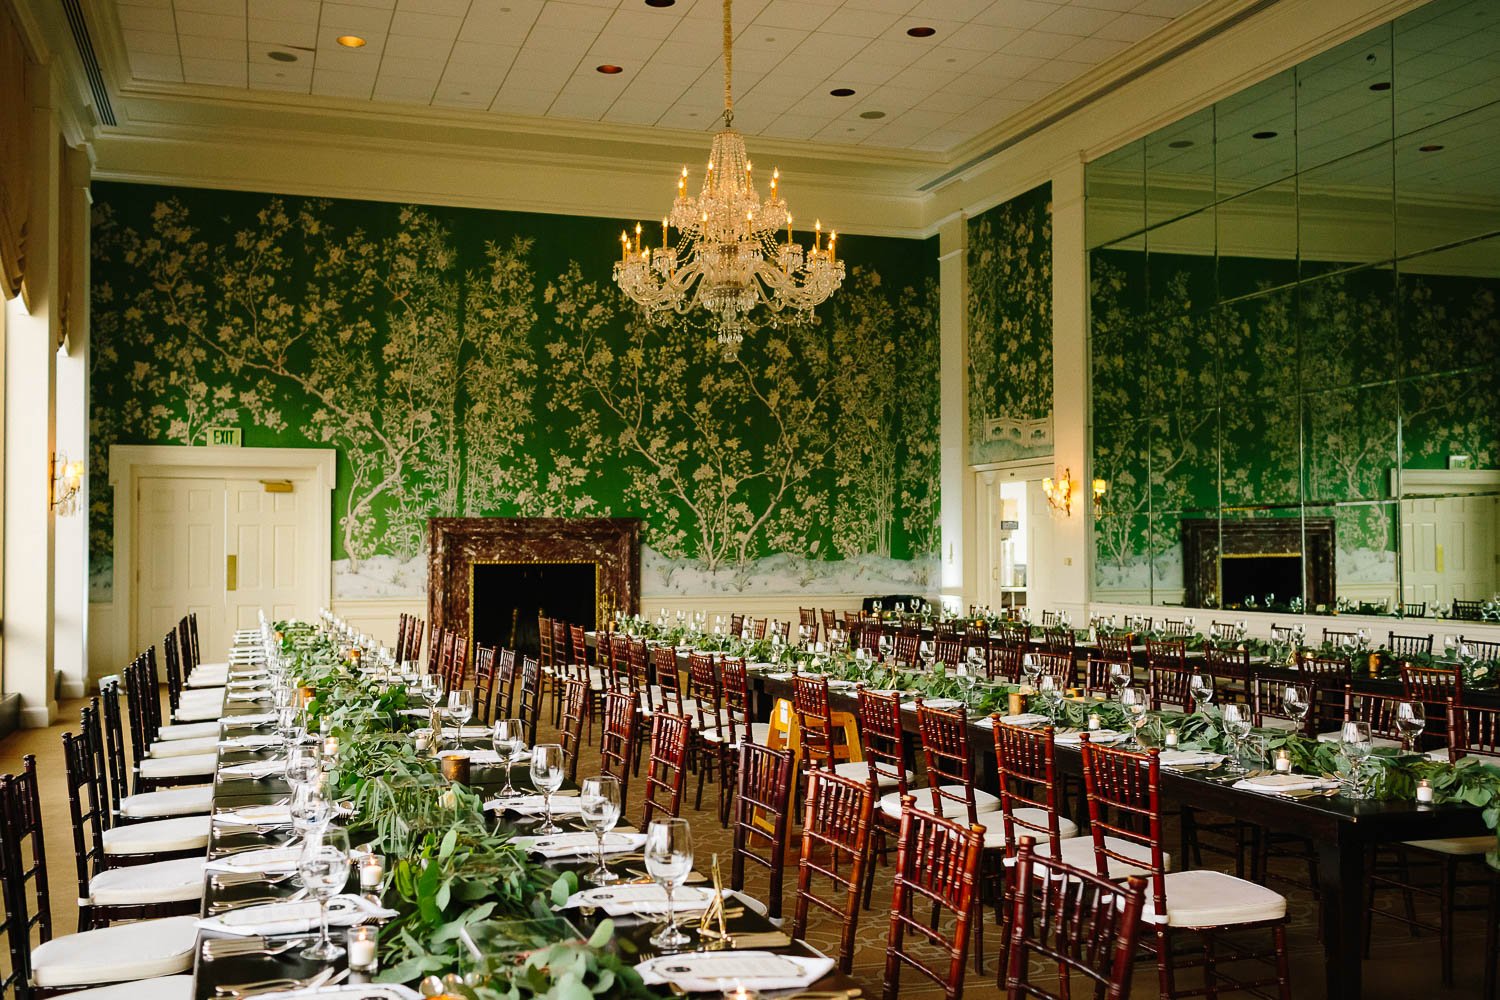 Beautiful dinner set up for wedding River Oaks Country Club-Leica photographer-Philip Thomas Photography